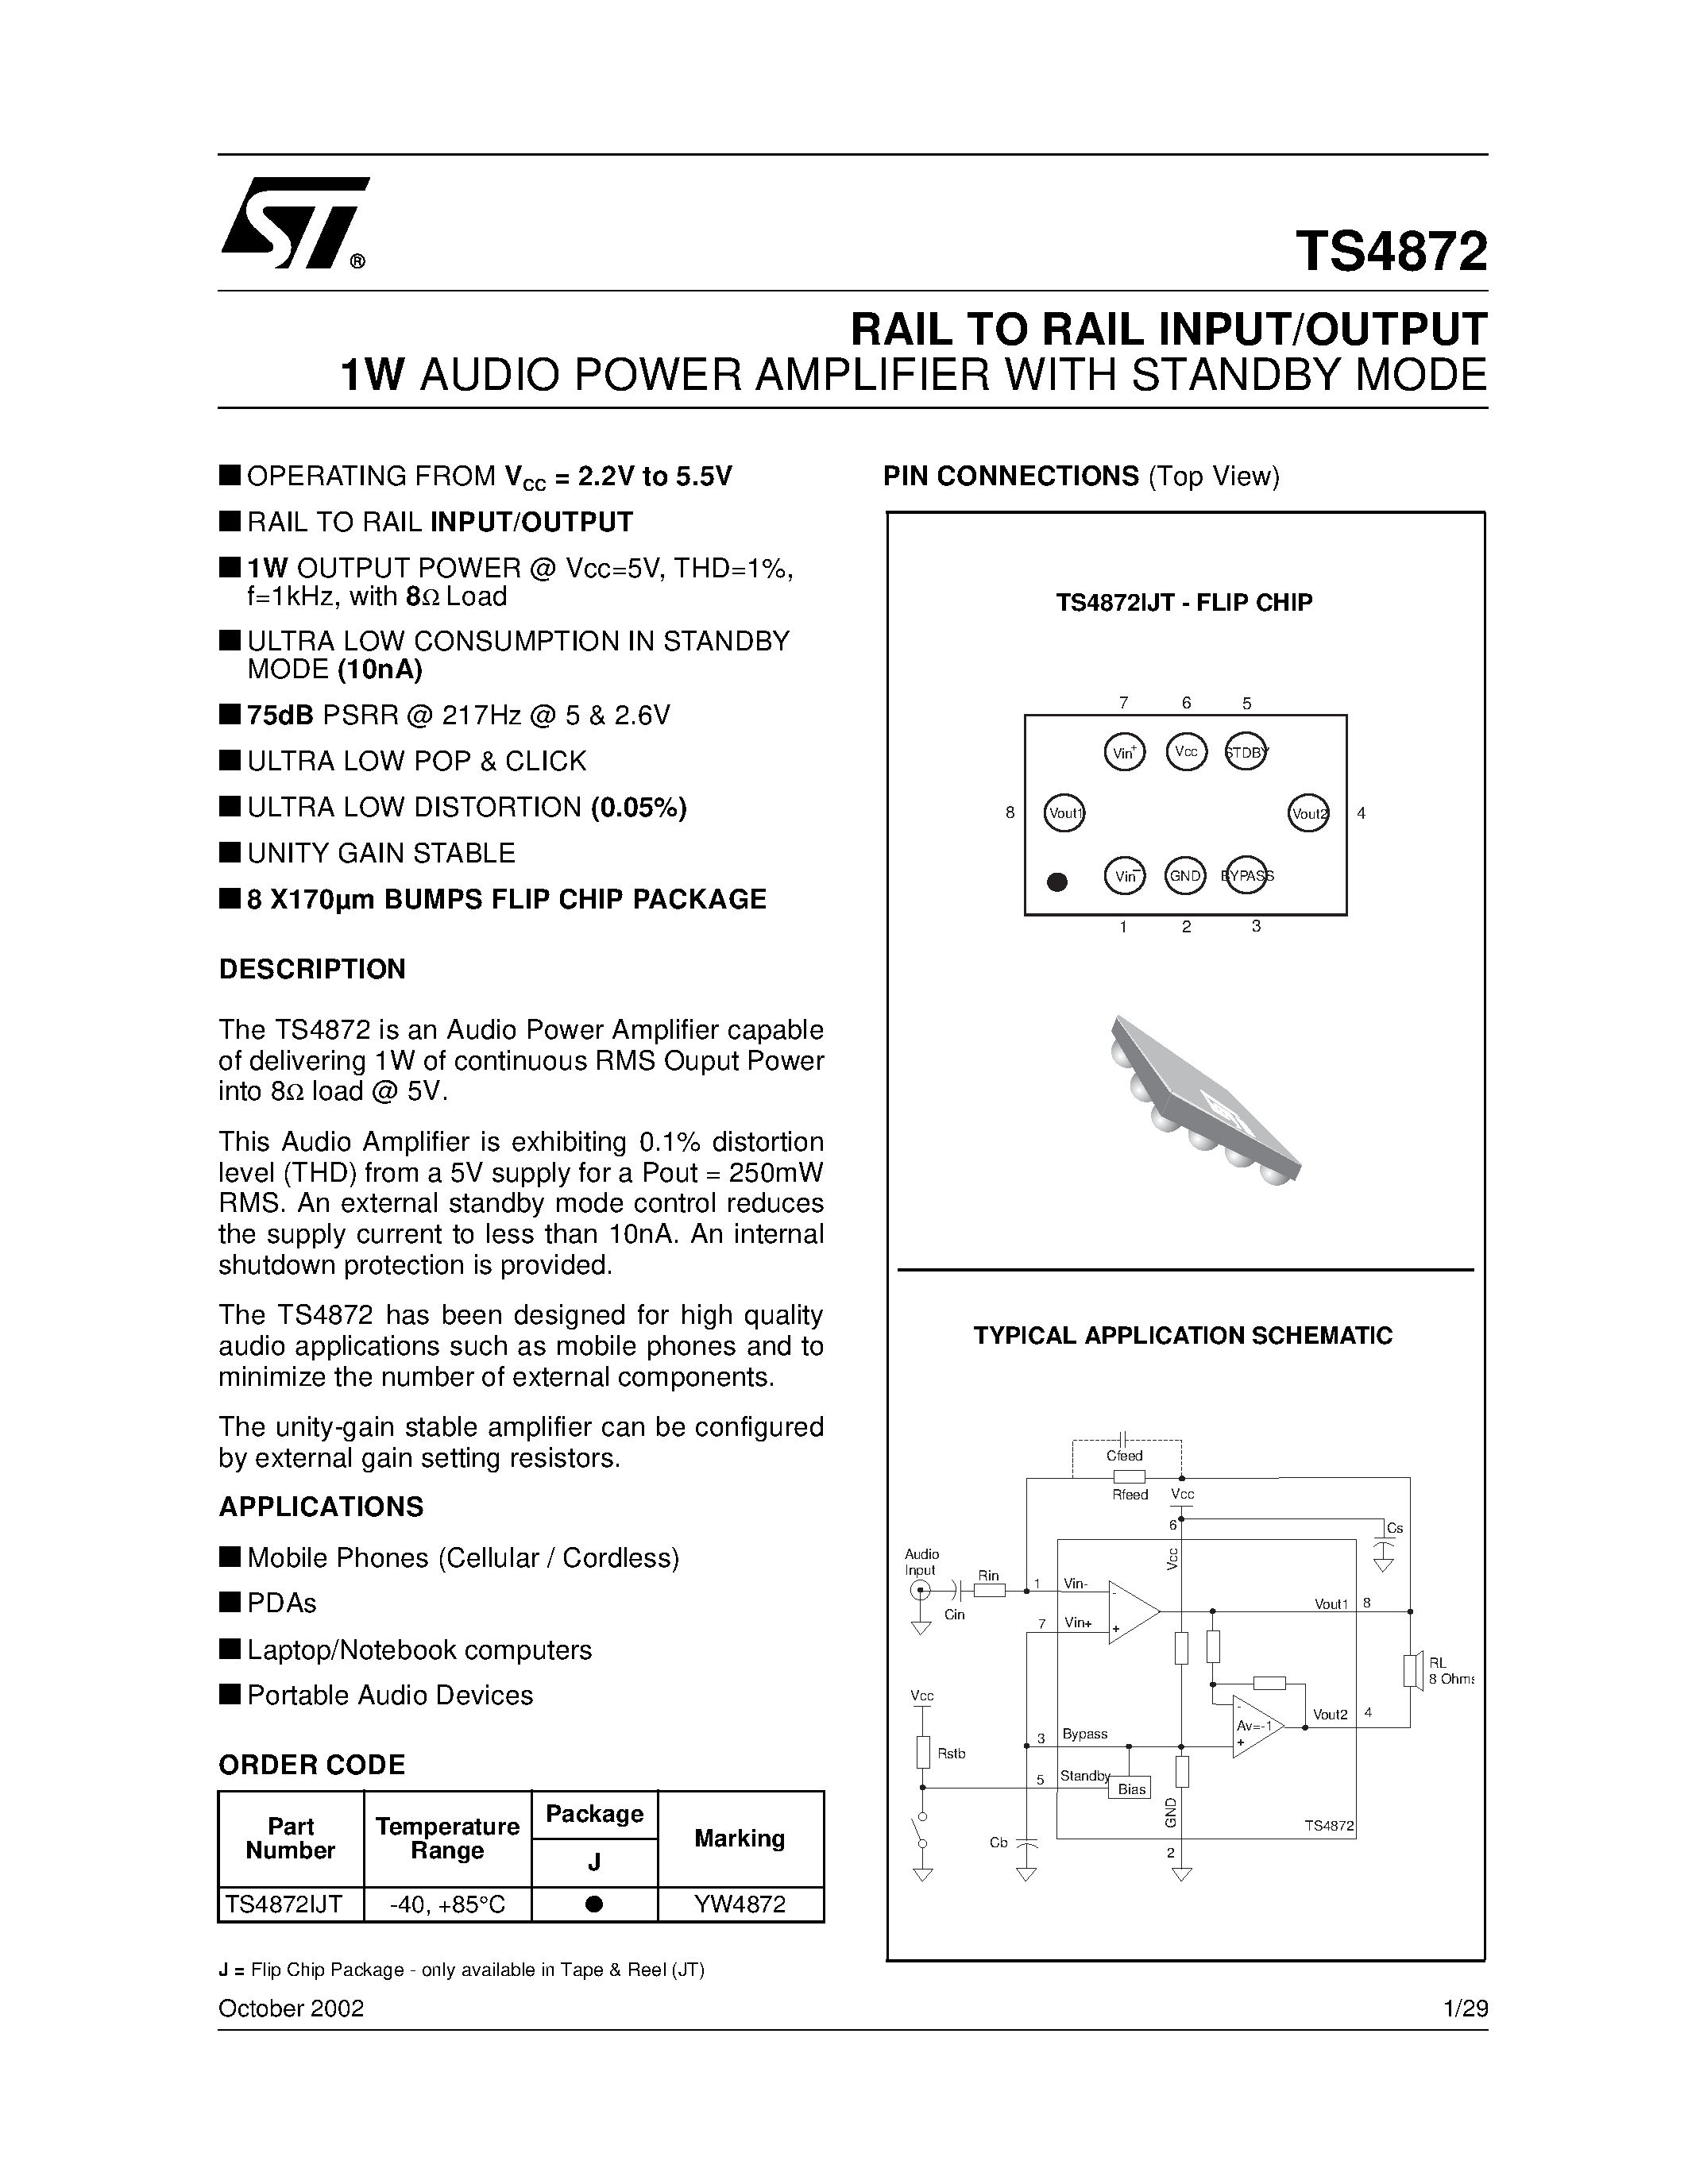 Даташит TS4872 - RAIL TO RAIL INPUT/OUTPUT 1W AUDIO POWER AMPLIFIER WITH STANDBY MODE страница 1